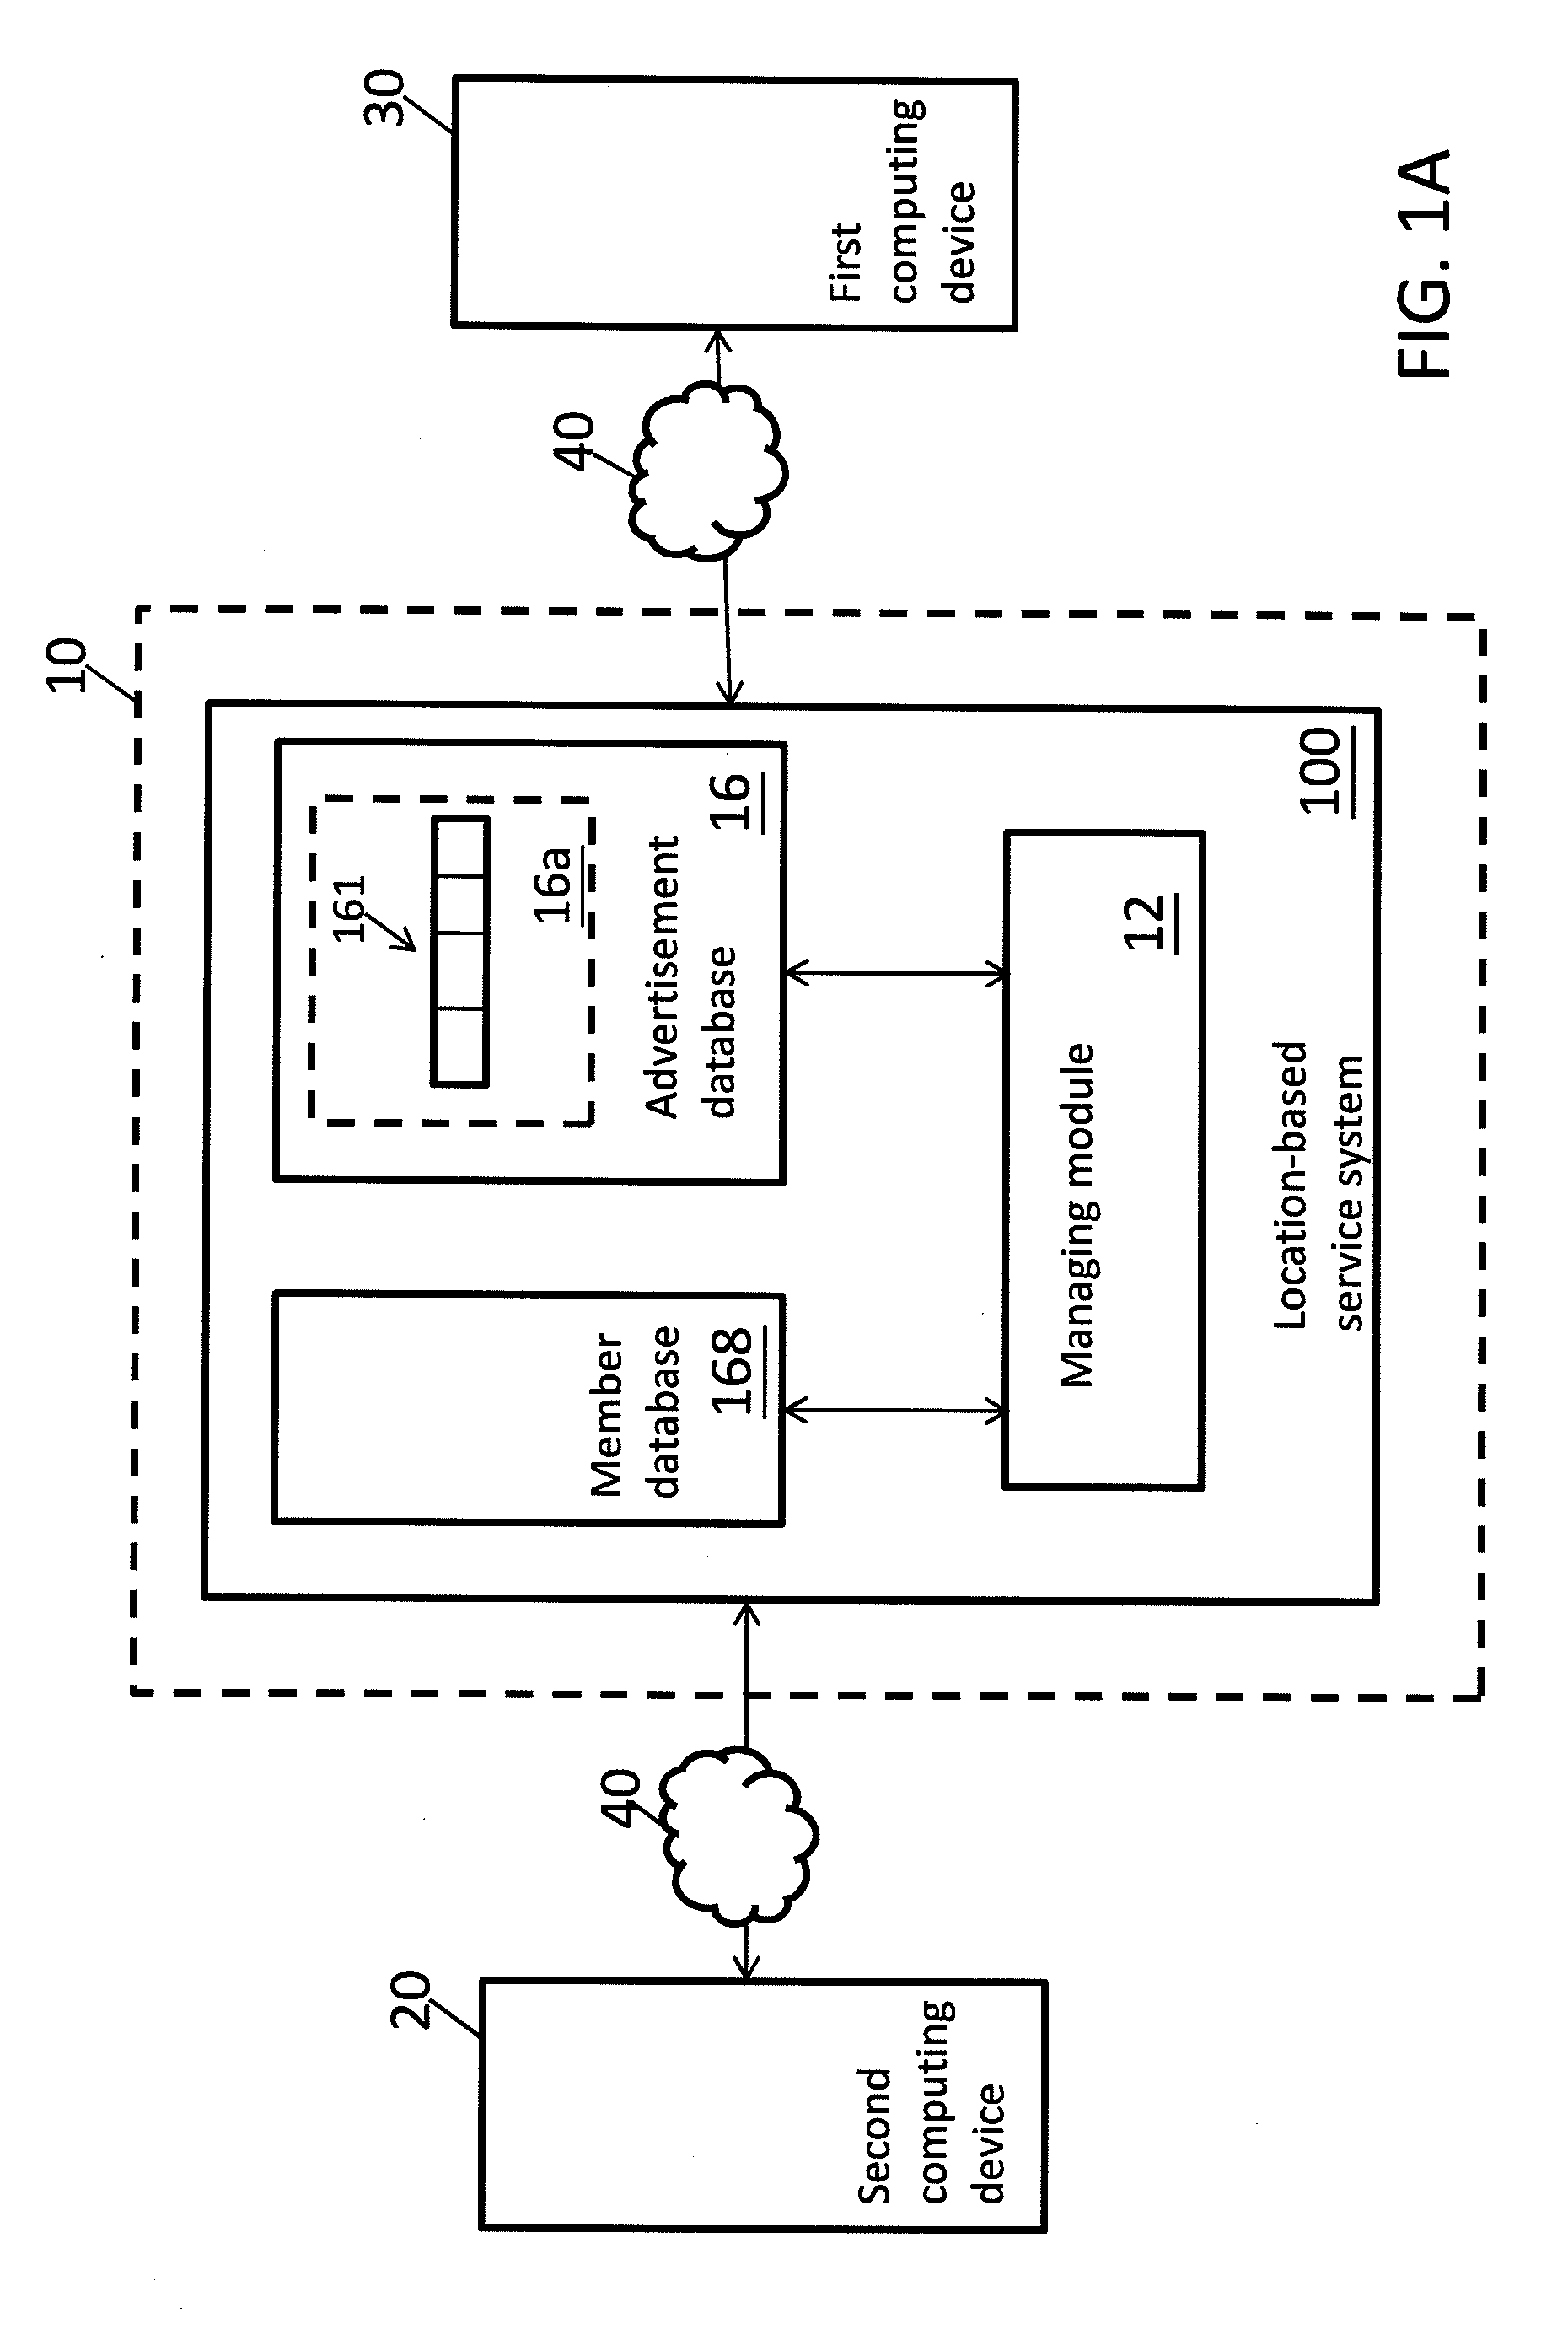 Location-based service system